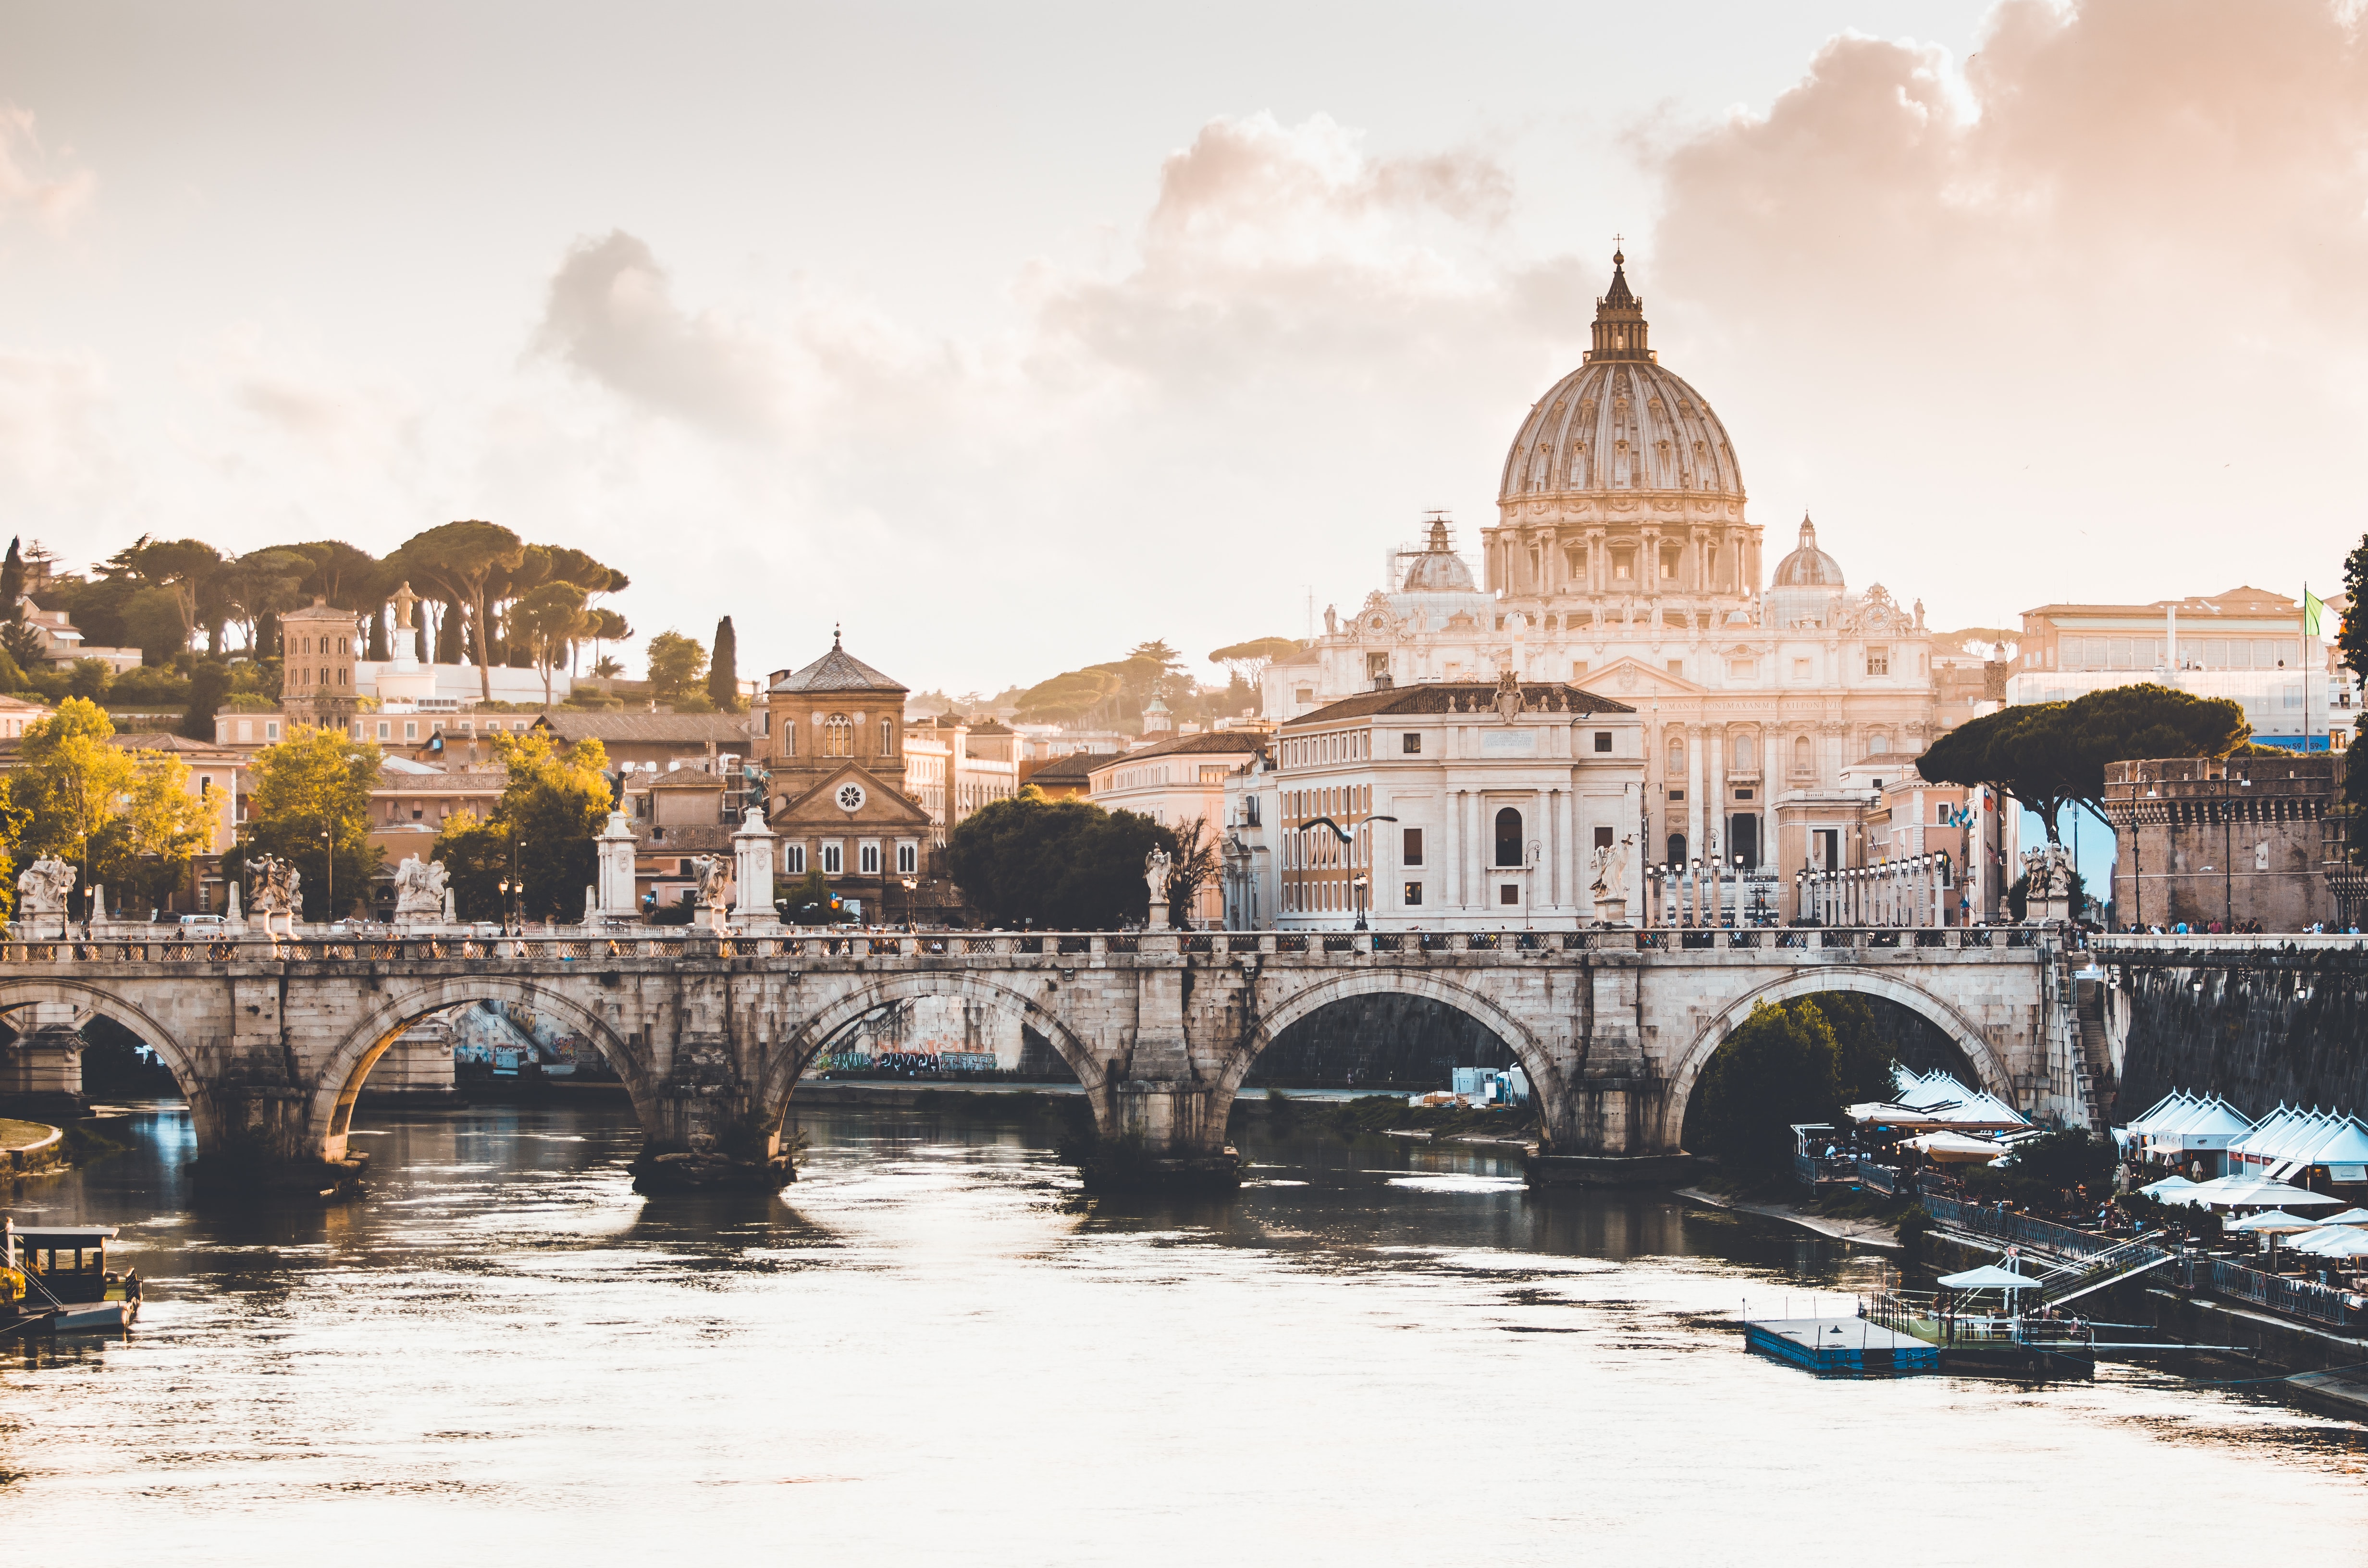 A photo of the Vatican at sunrise showing a bridge over a waterway.